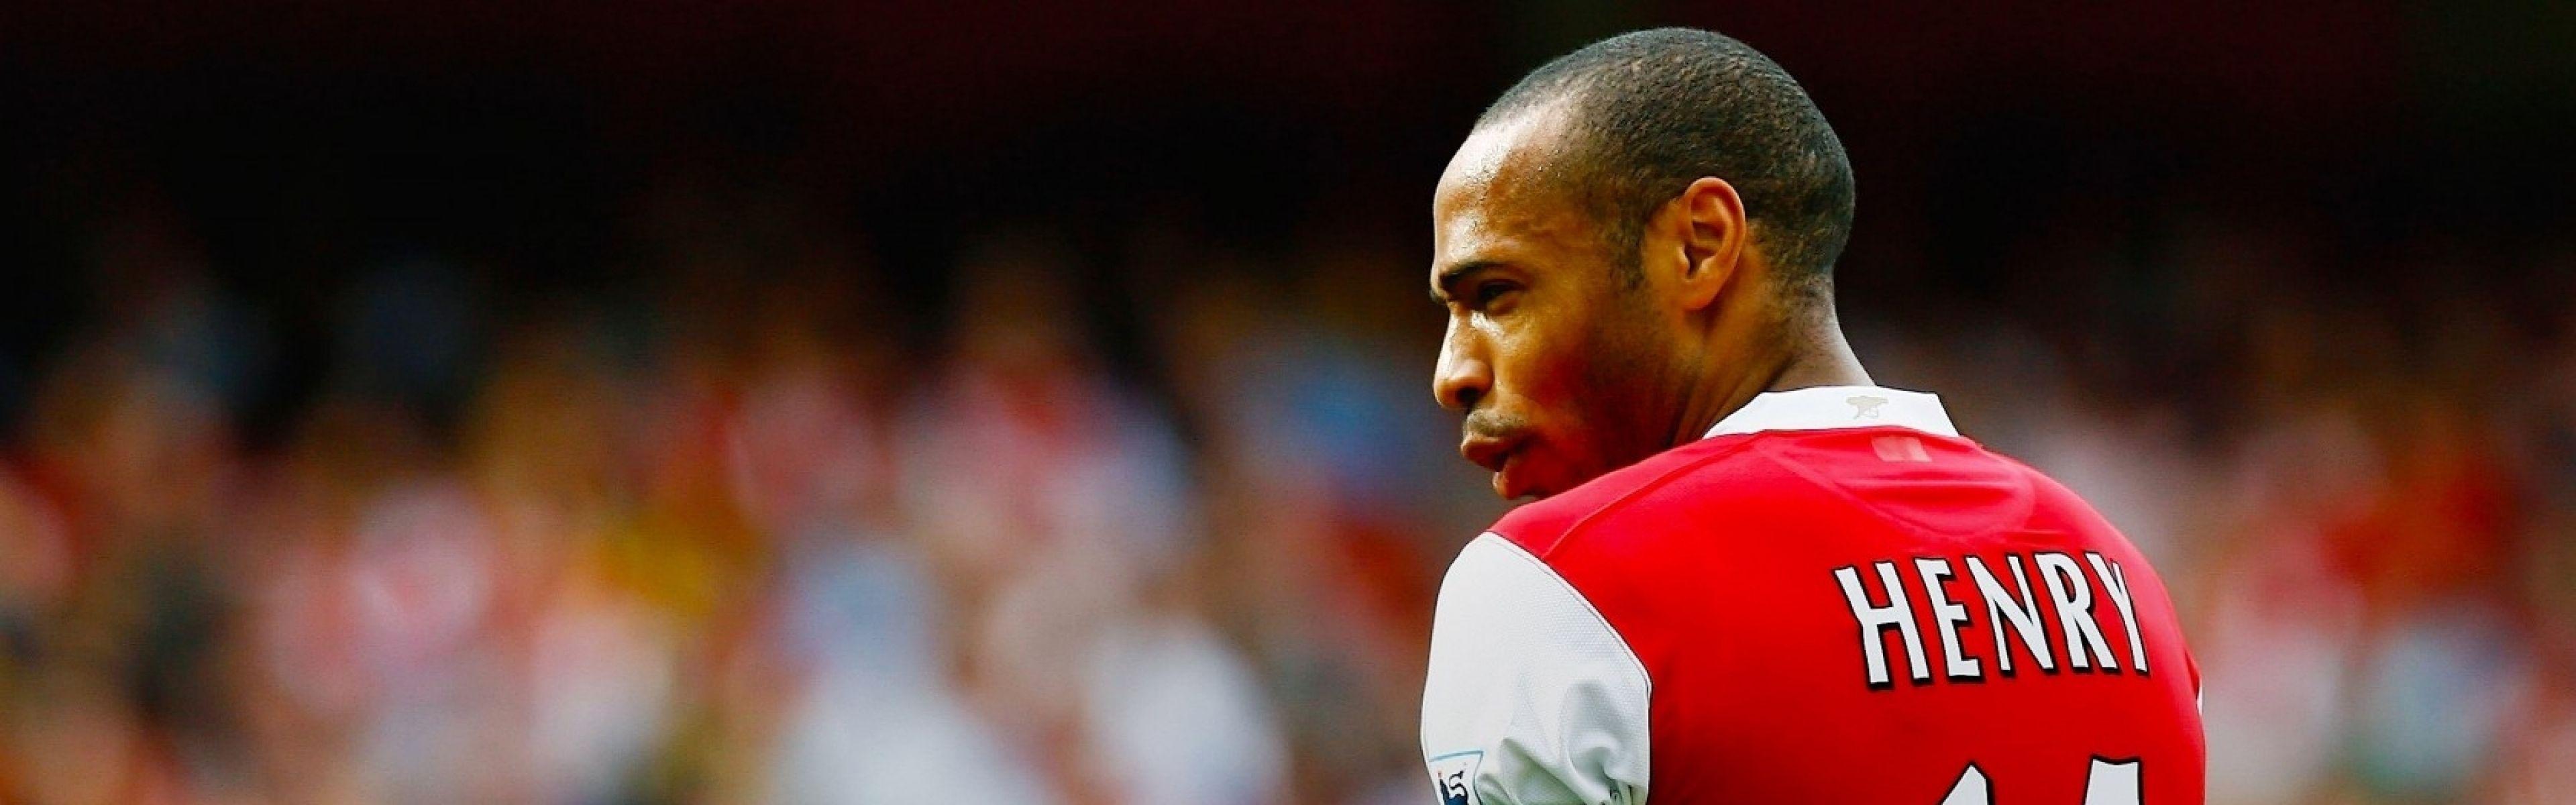 Download Wallpaper 3840x1200 Thierry henry, Henry, Arsenal